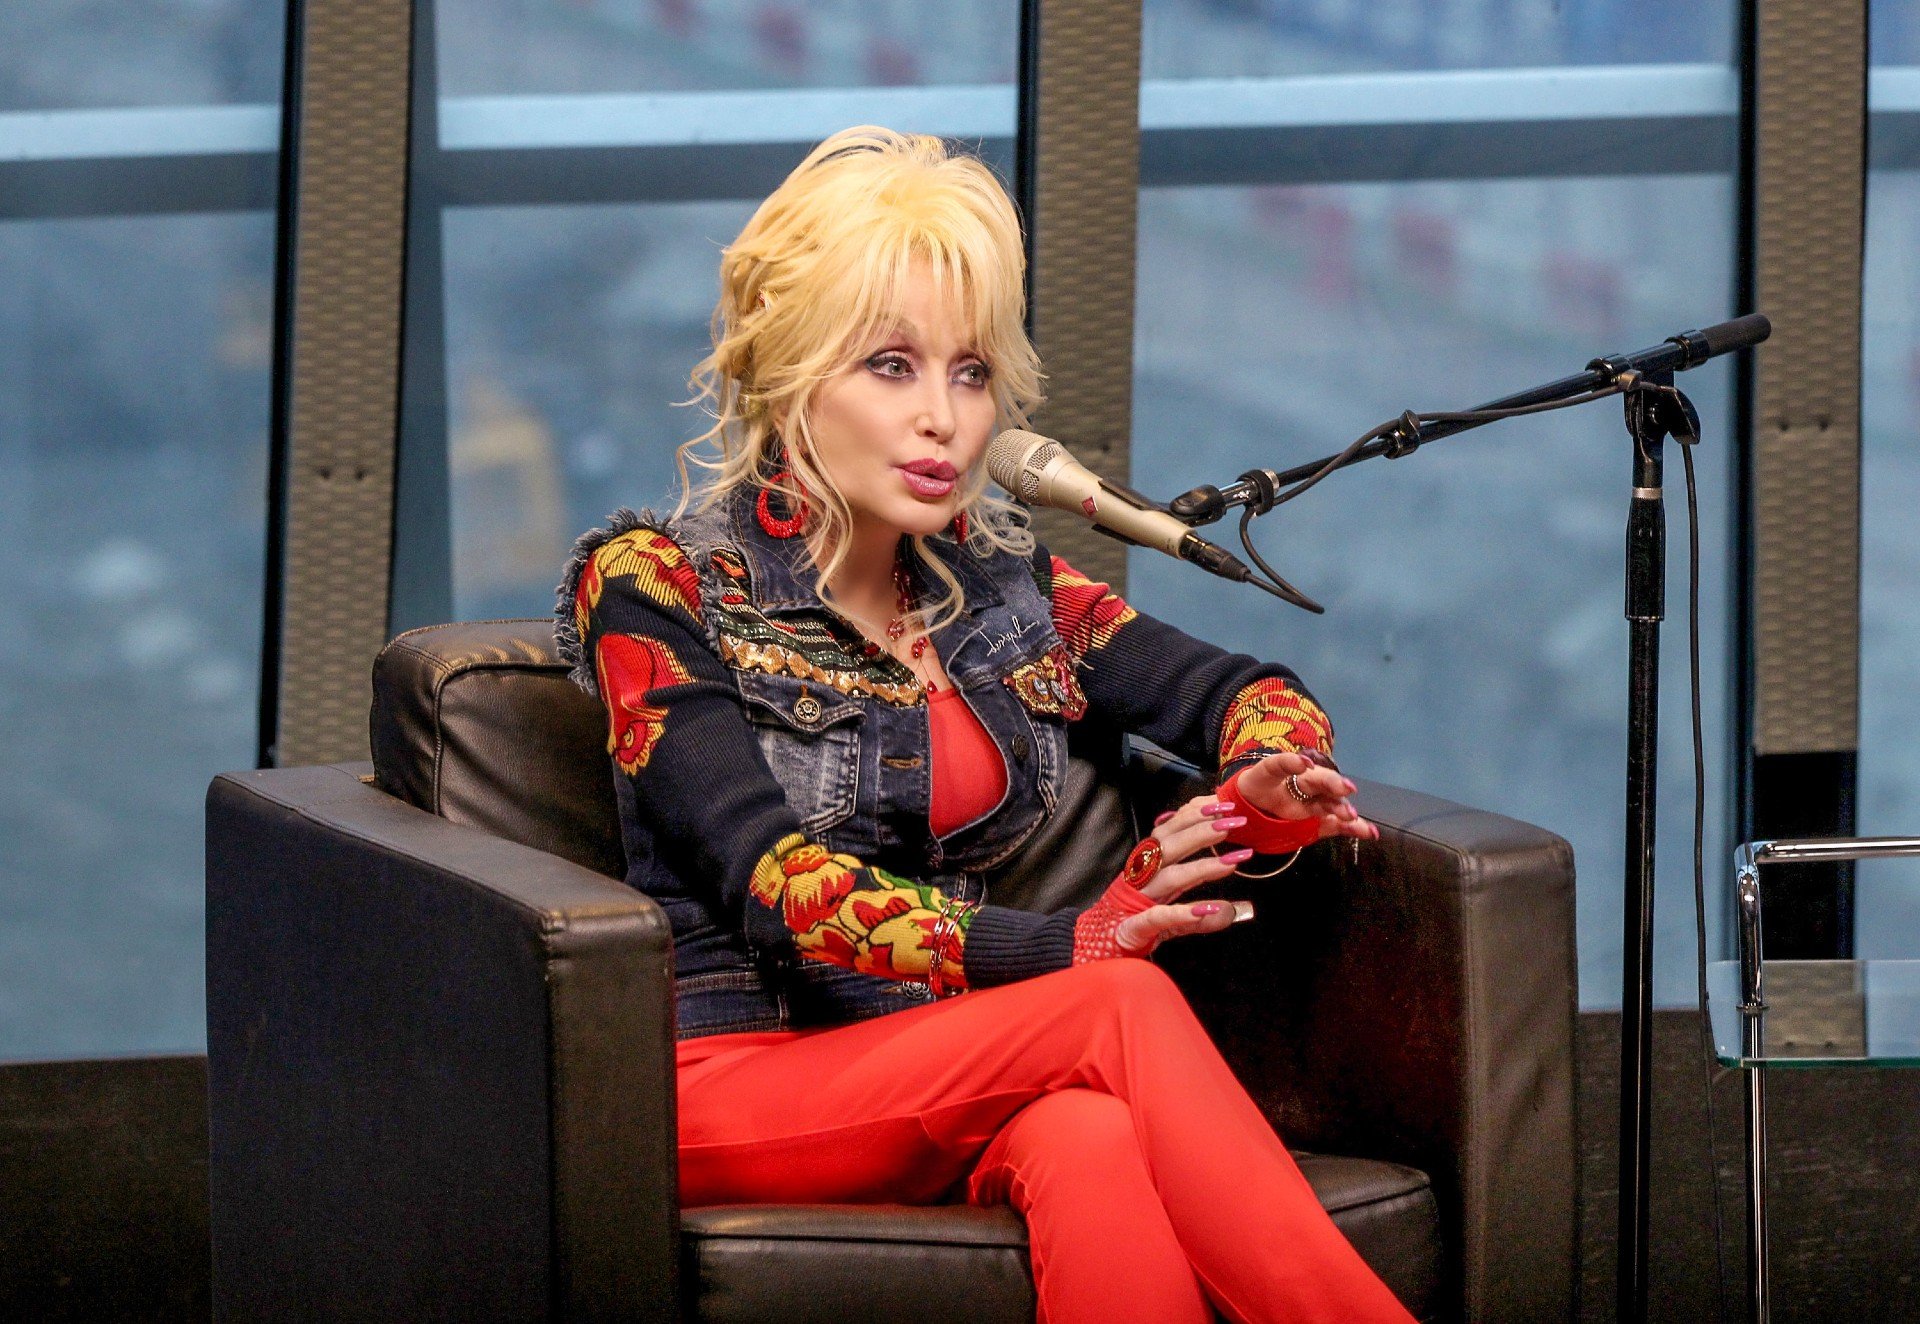 Dolly Parton sits and speaks into a microphone during an interview.